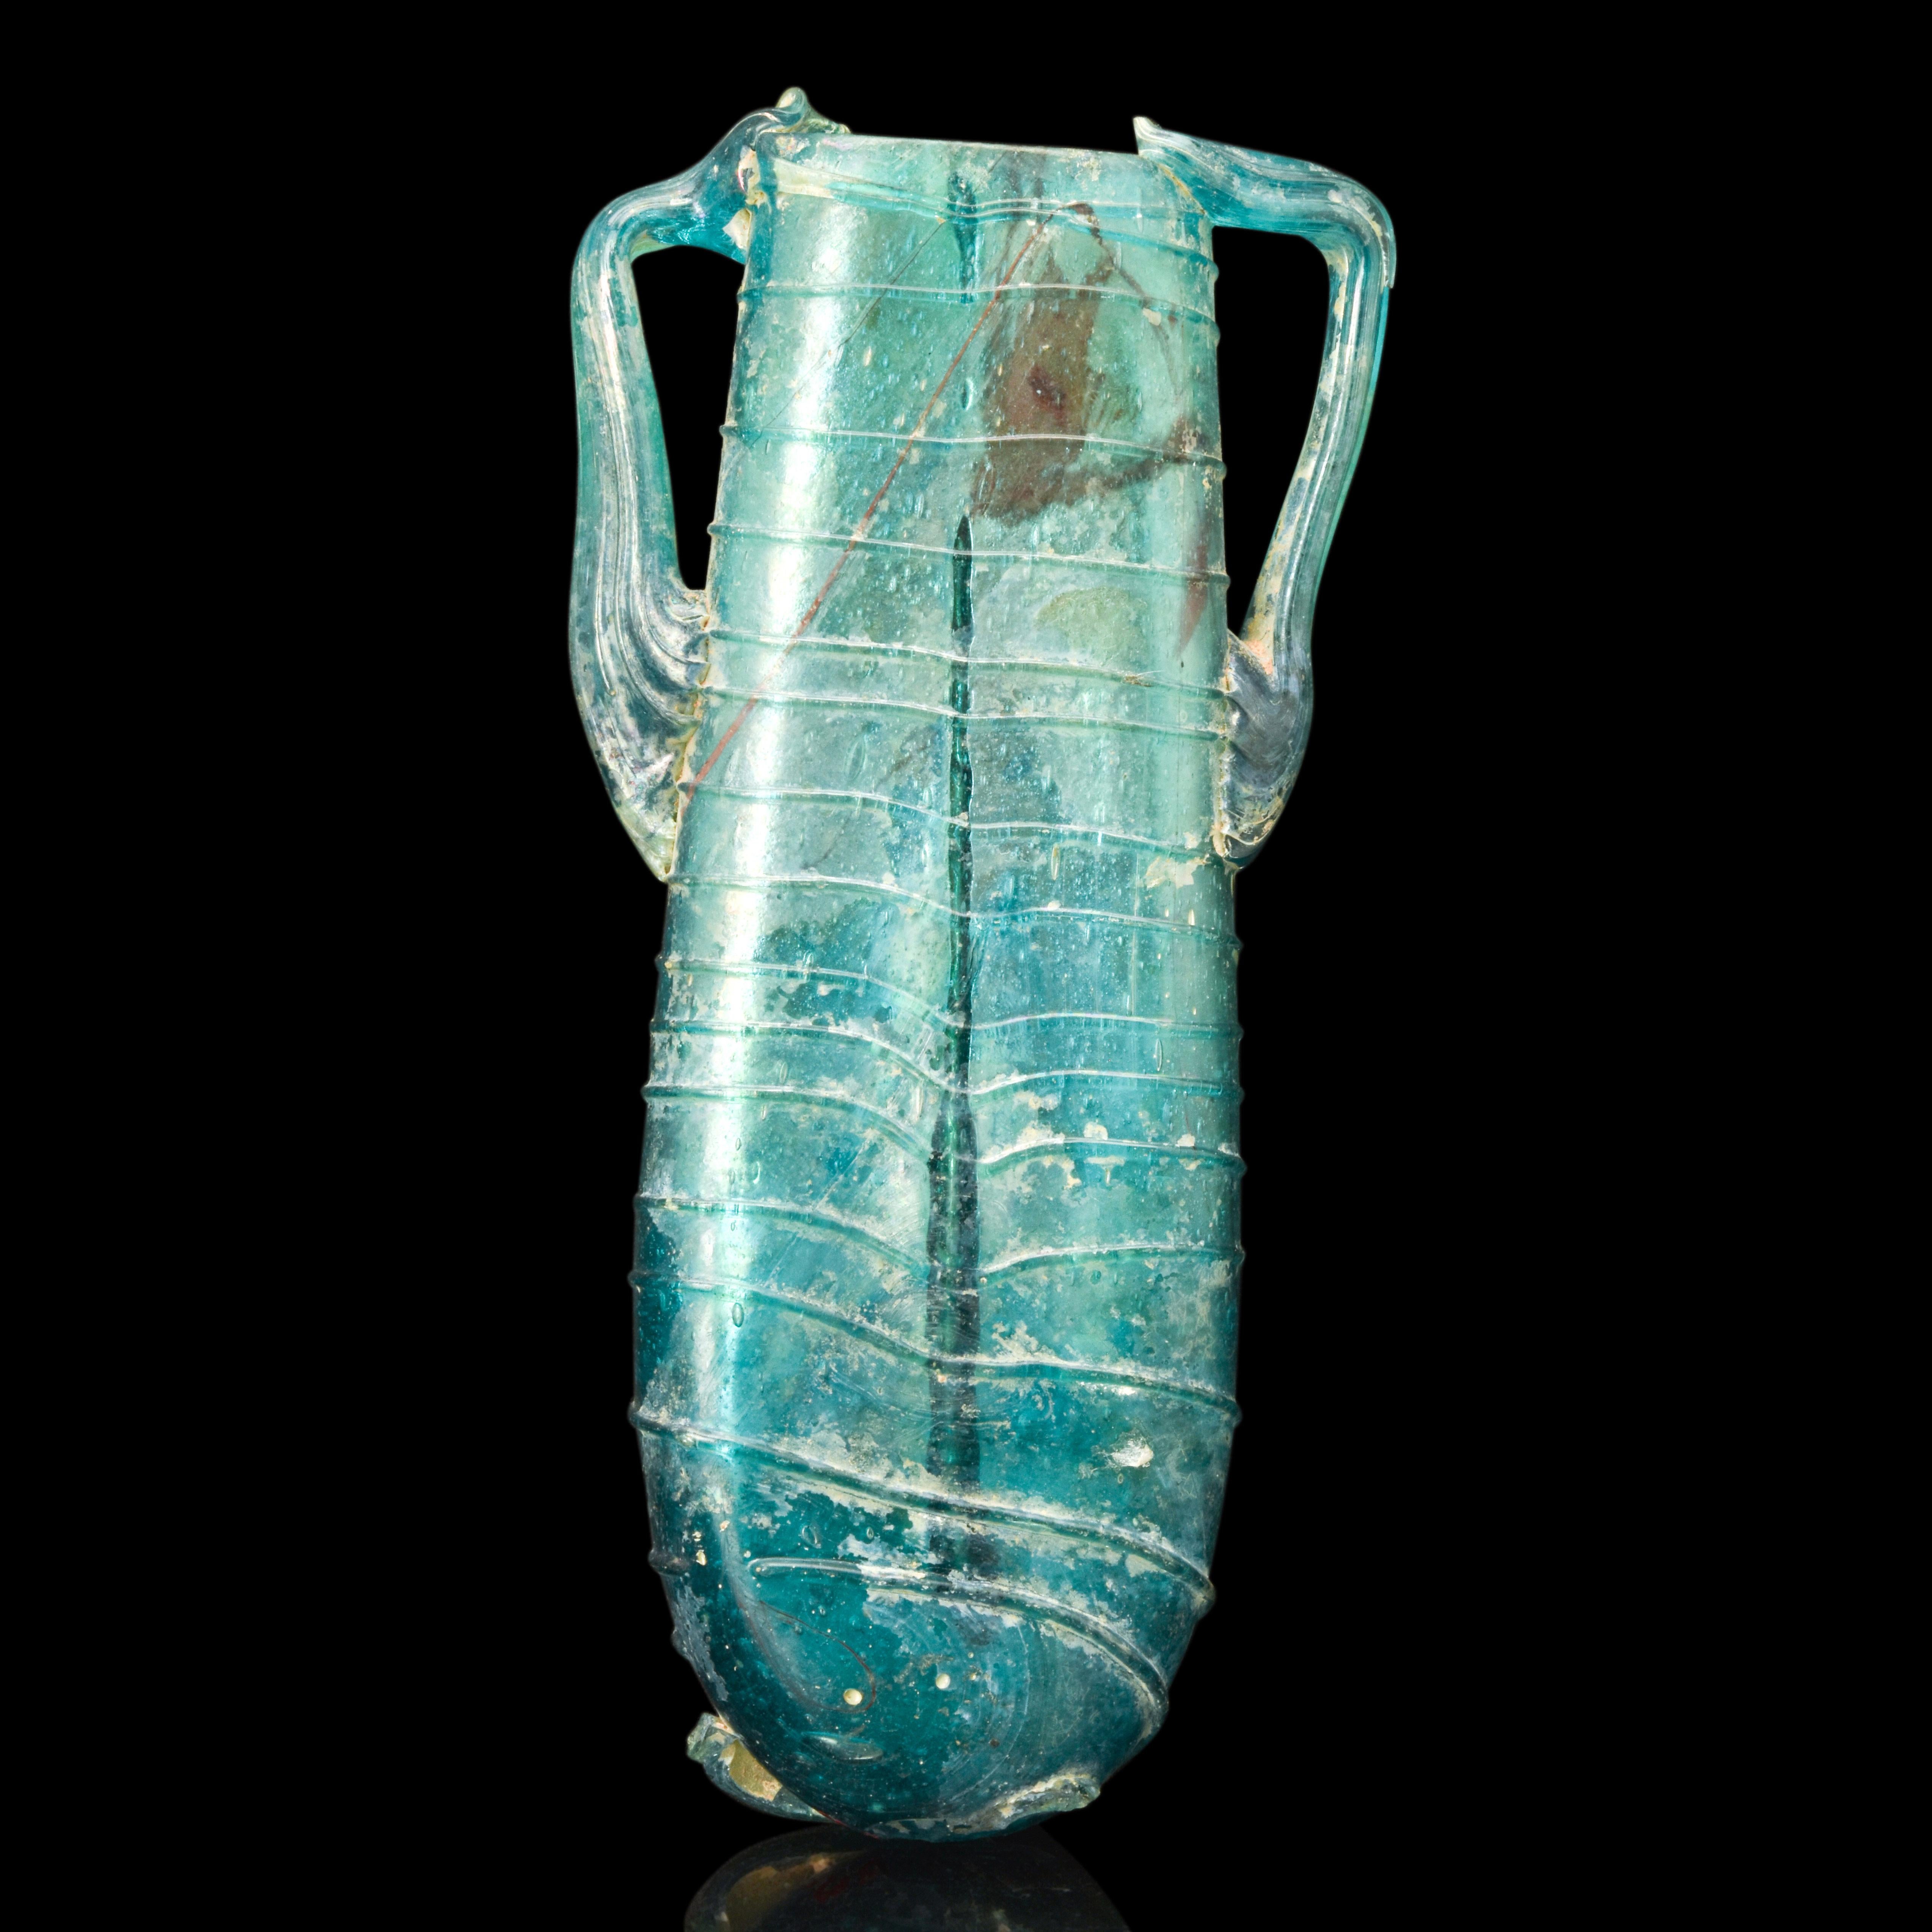 A Roman double balsamarium made of translucent, bright blue-green glass. The vessel is composed of two tubular phials, rims folded inward and bulging slightly in the middle. Both phials have a delicate glass thread carefully wrapped around the